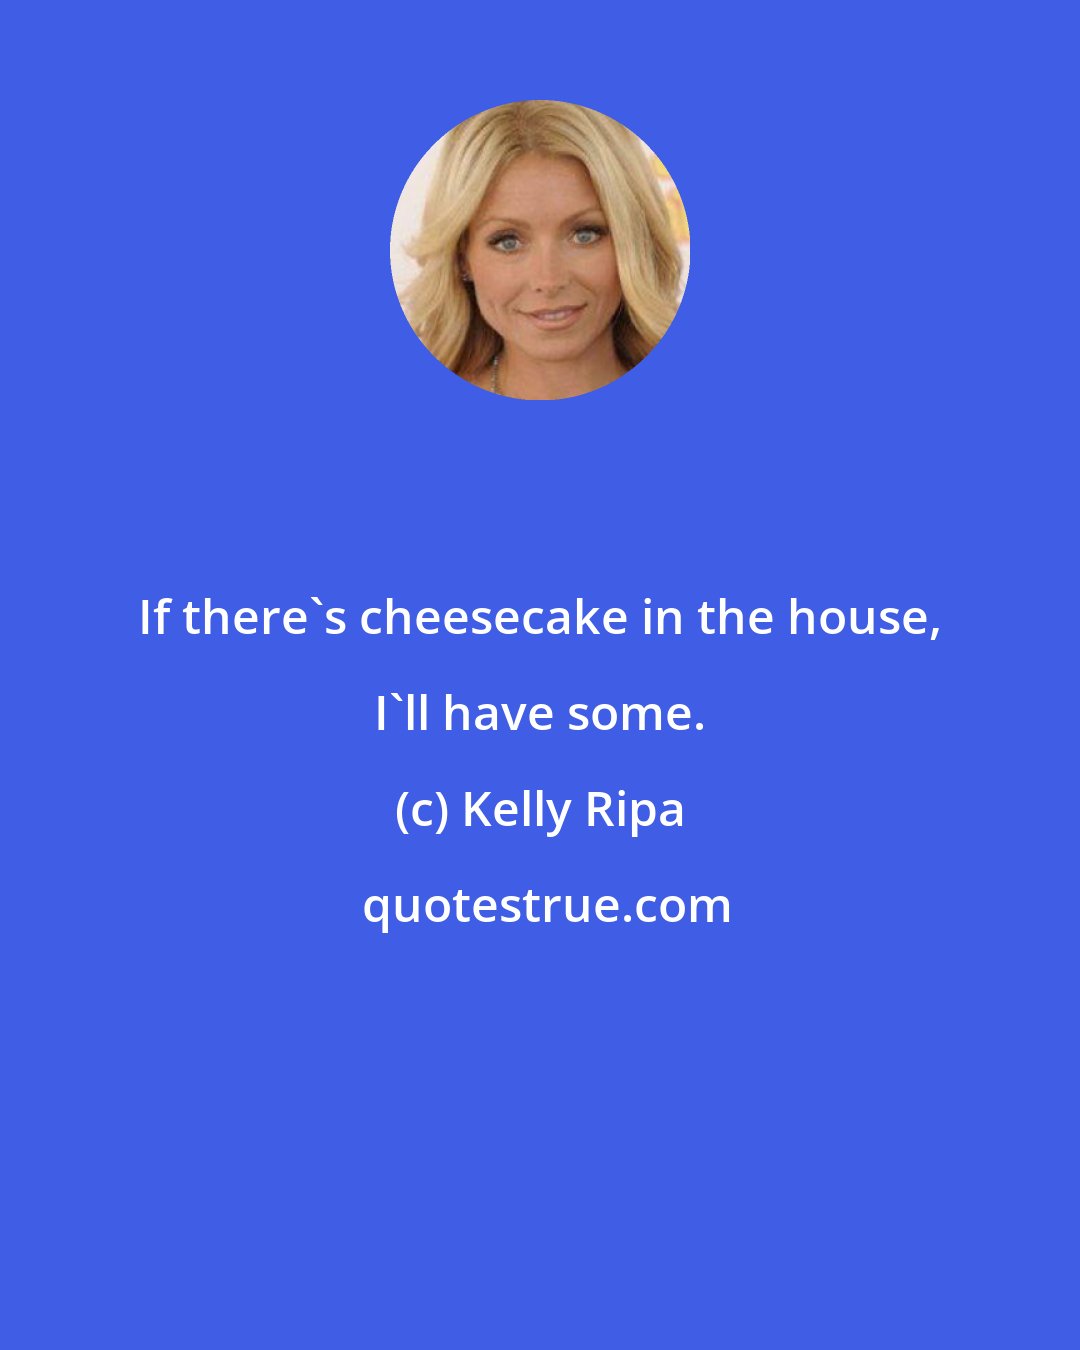 Kelly Ripa: If there's cheesecake in the house, I'll have some.